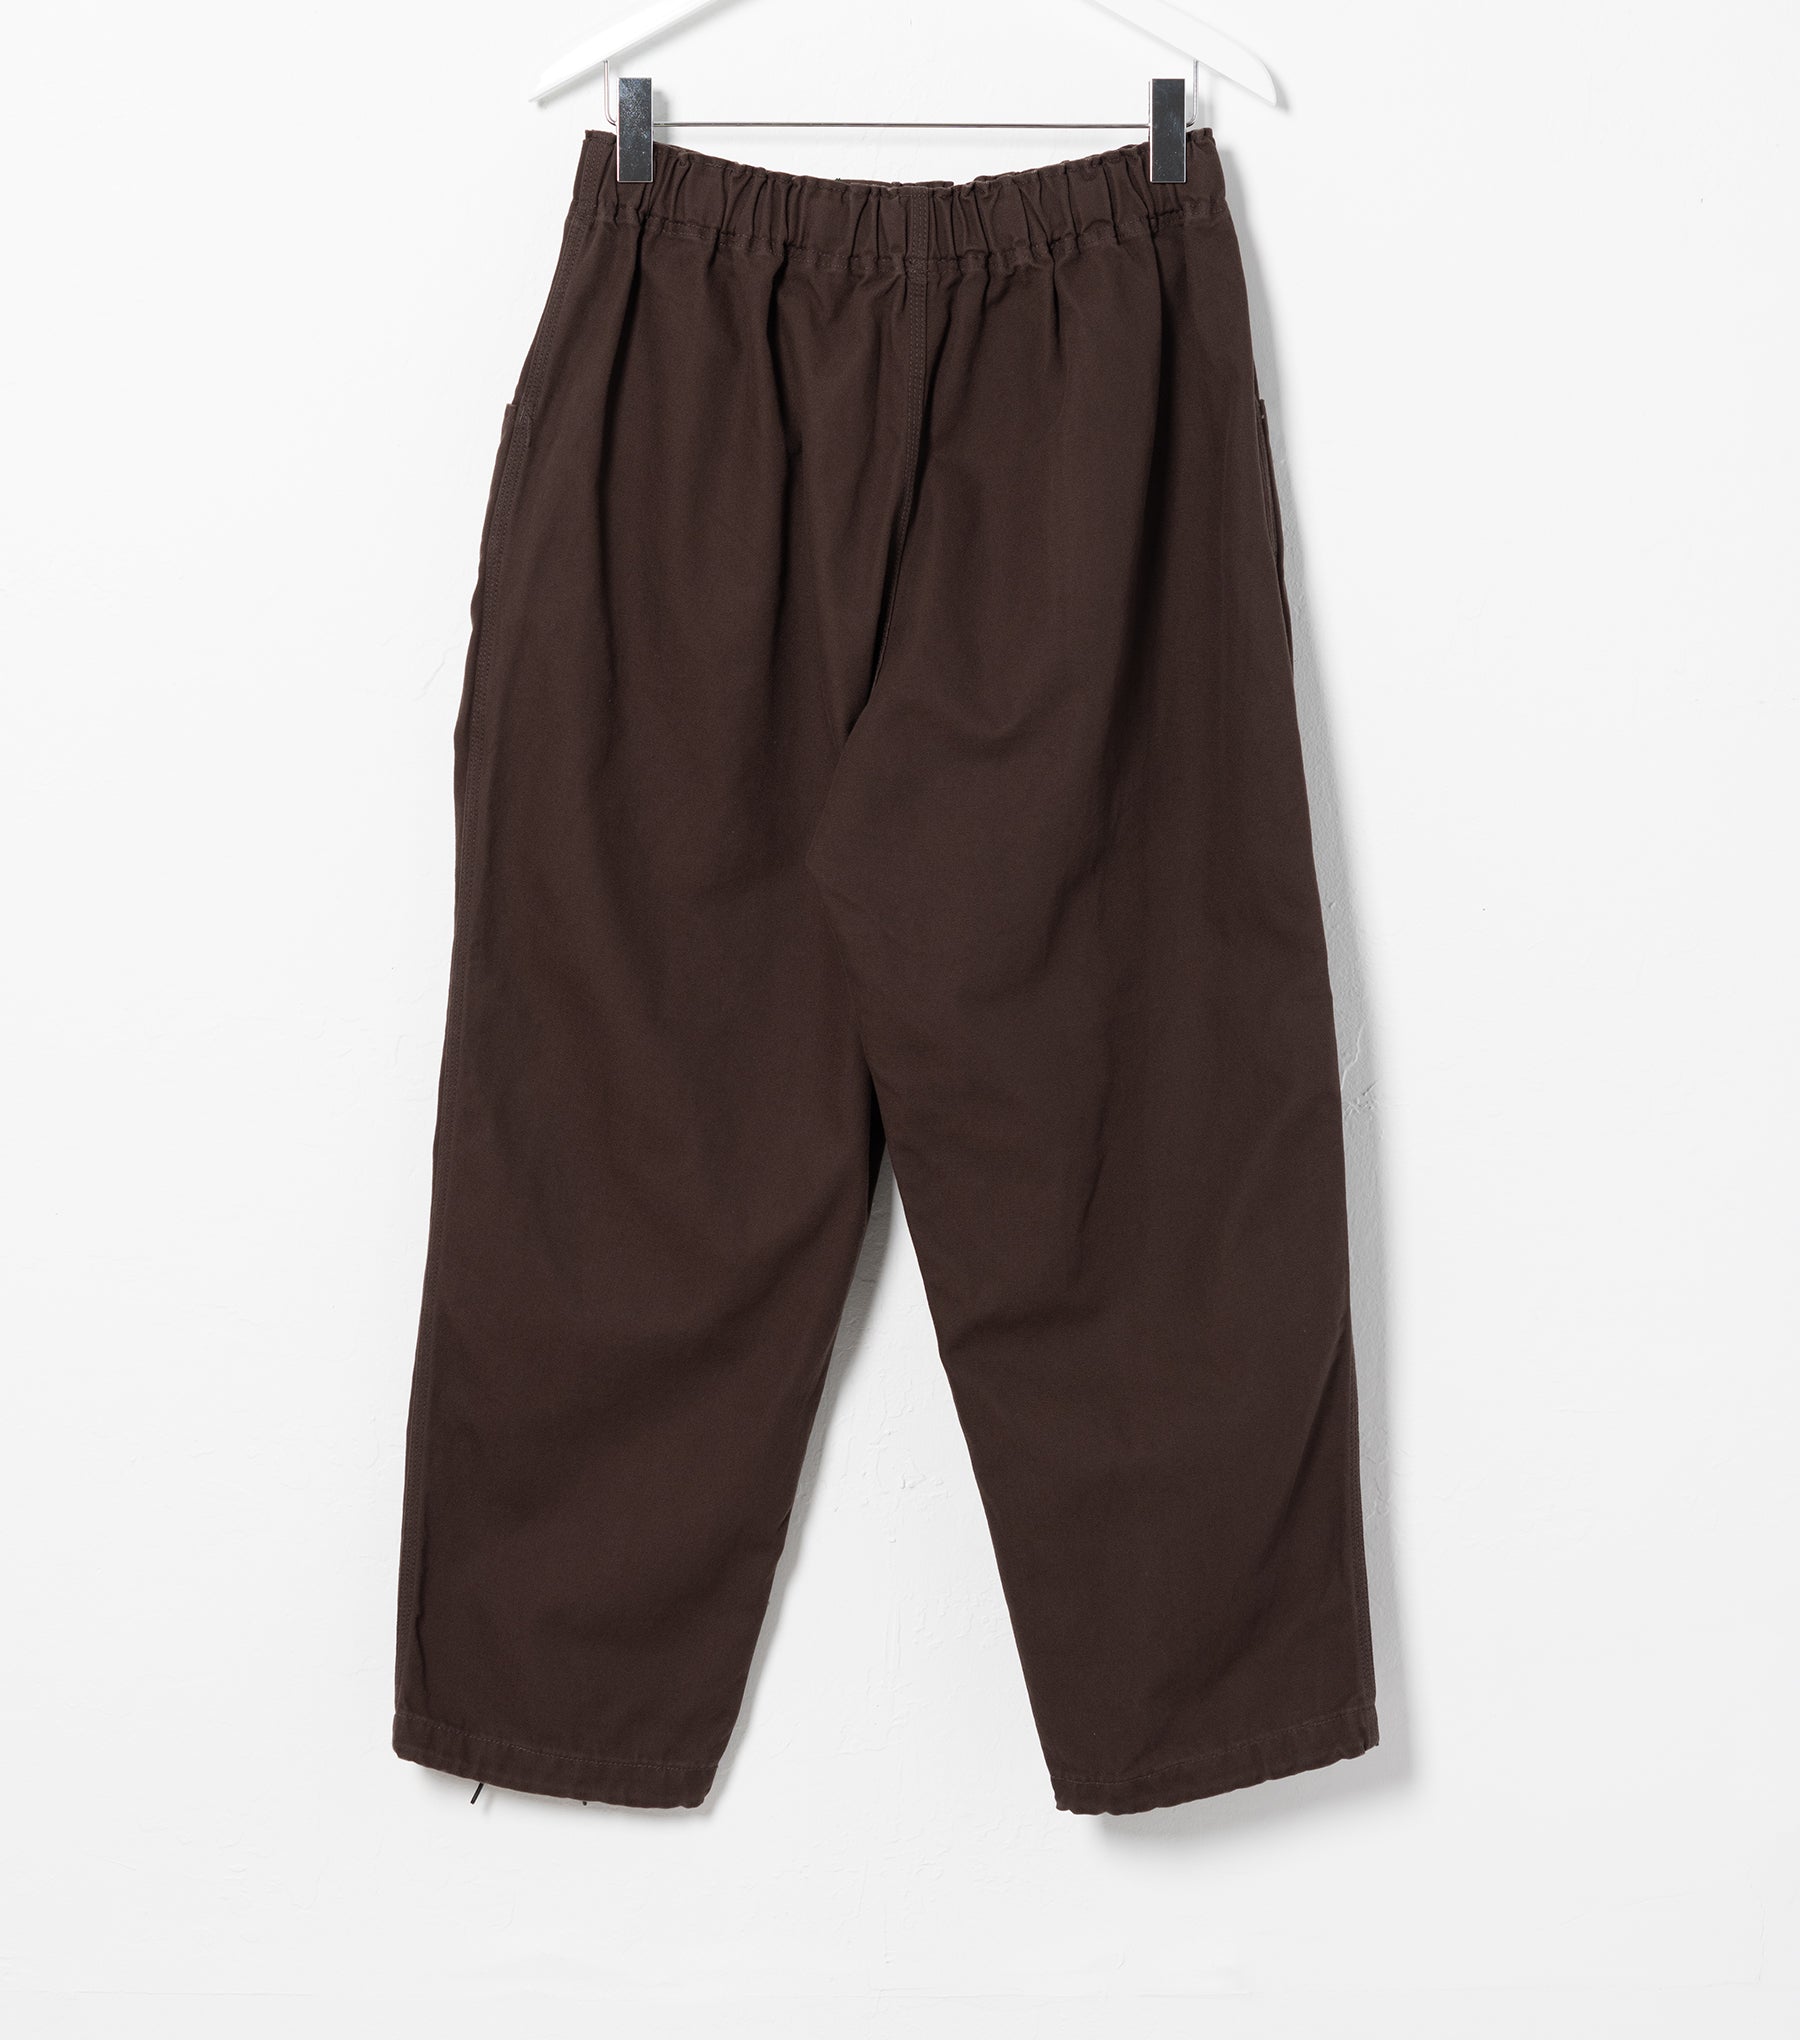 South2 West8 Belted C.S. Pant Canvas (Brown) – Bows and Arrows